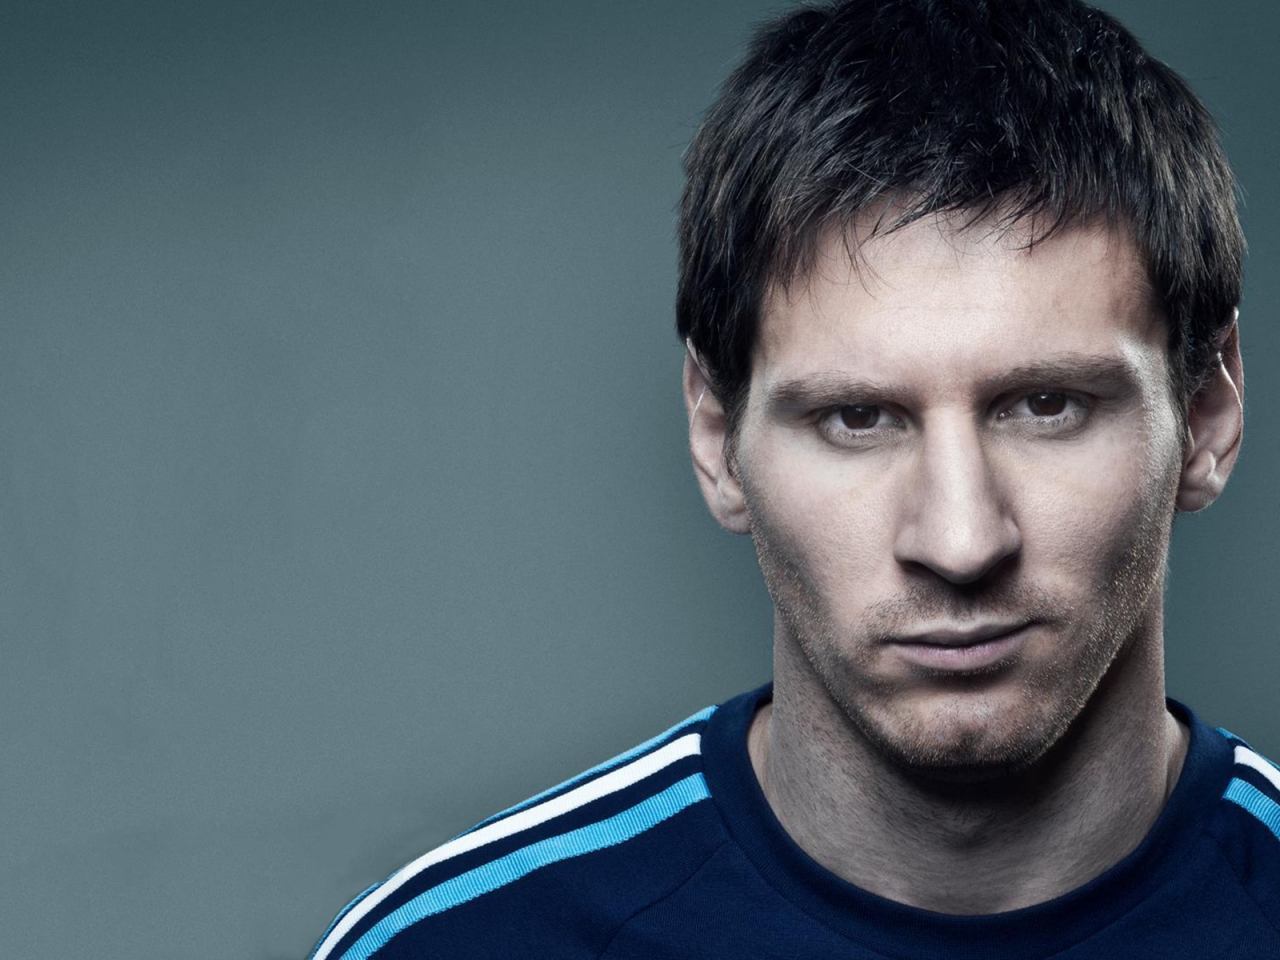 Messi Pose for 1280 x 960 resolution